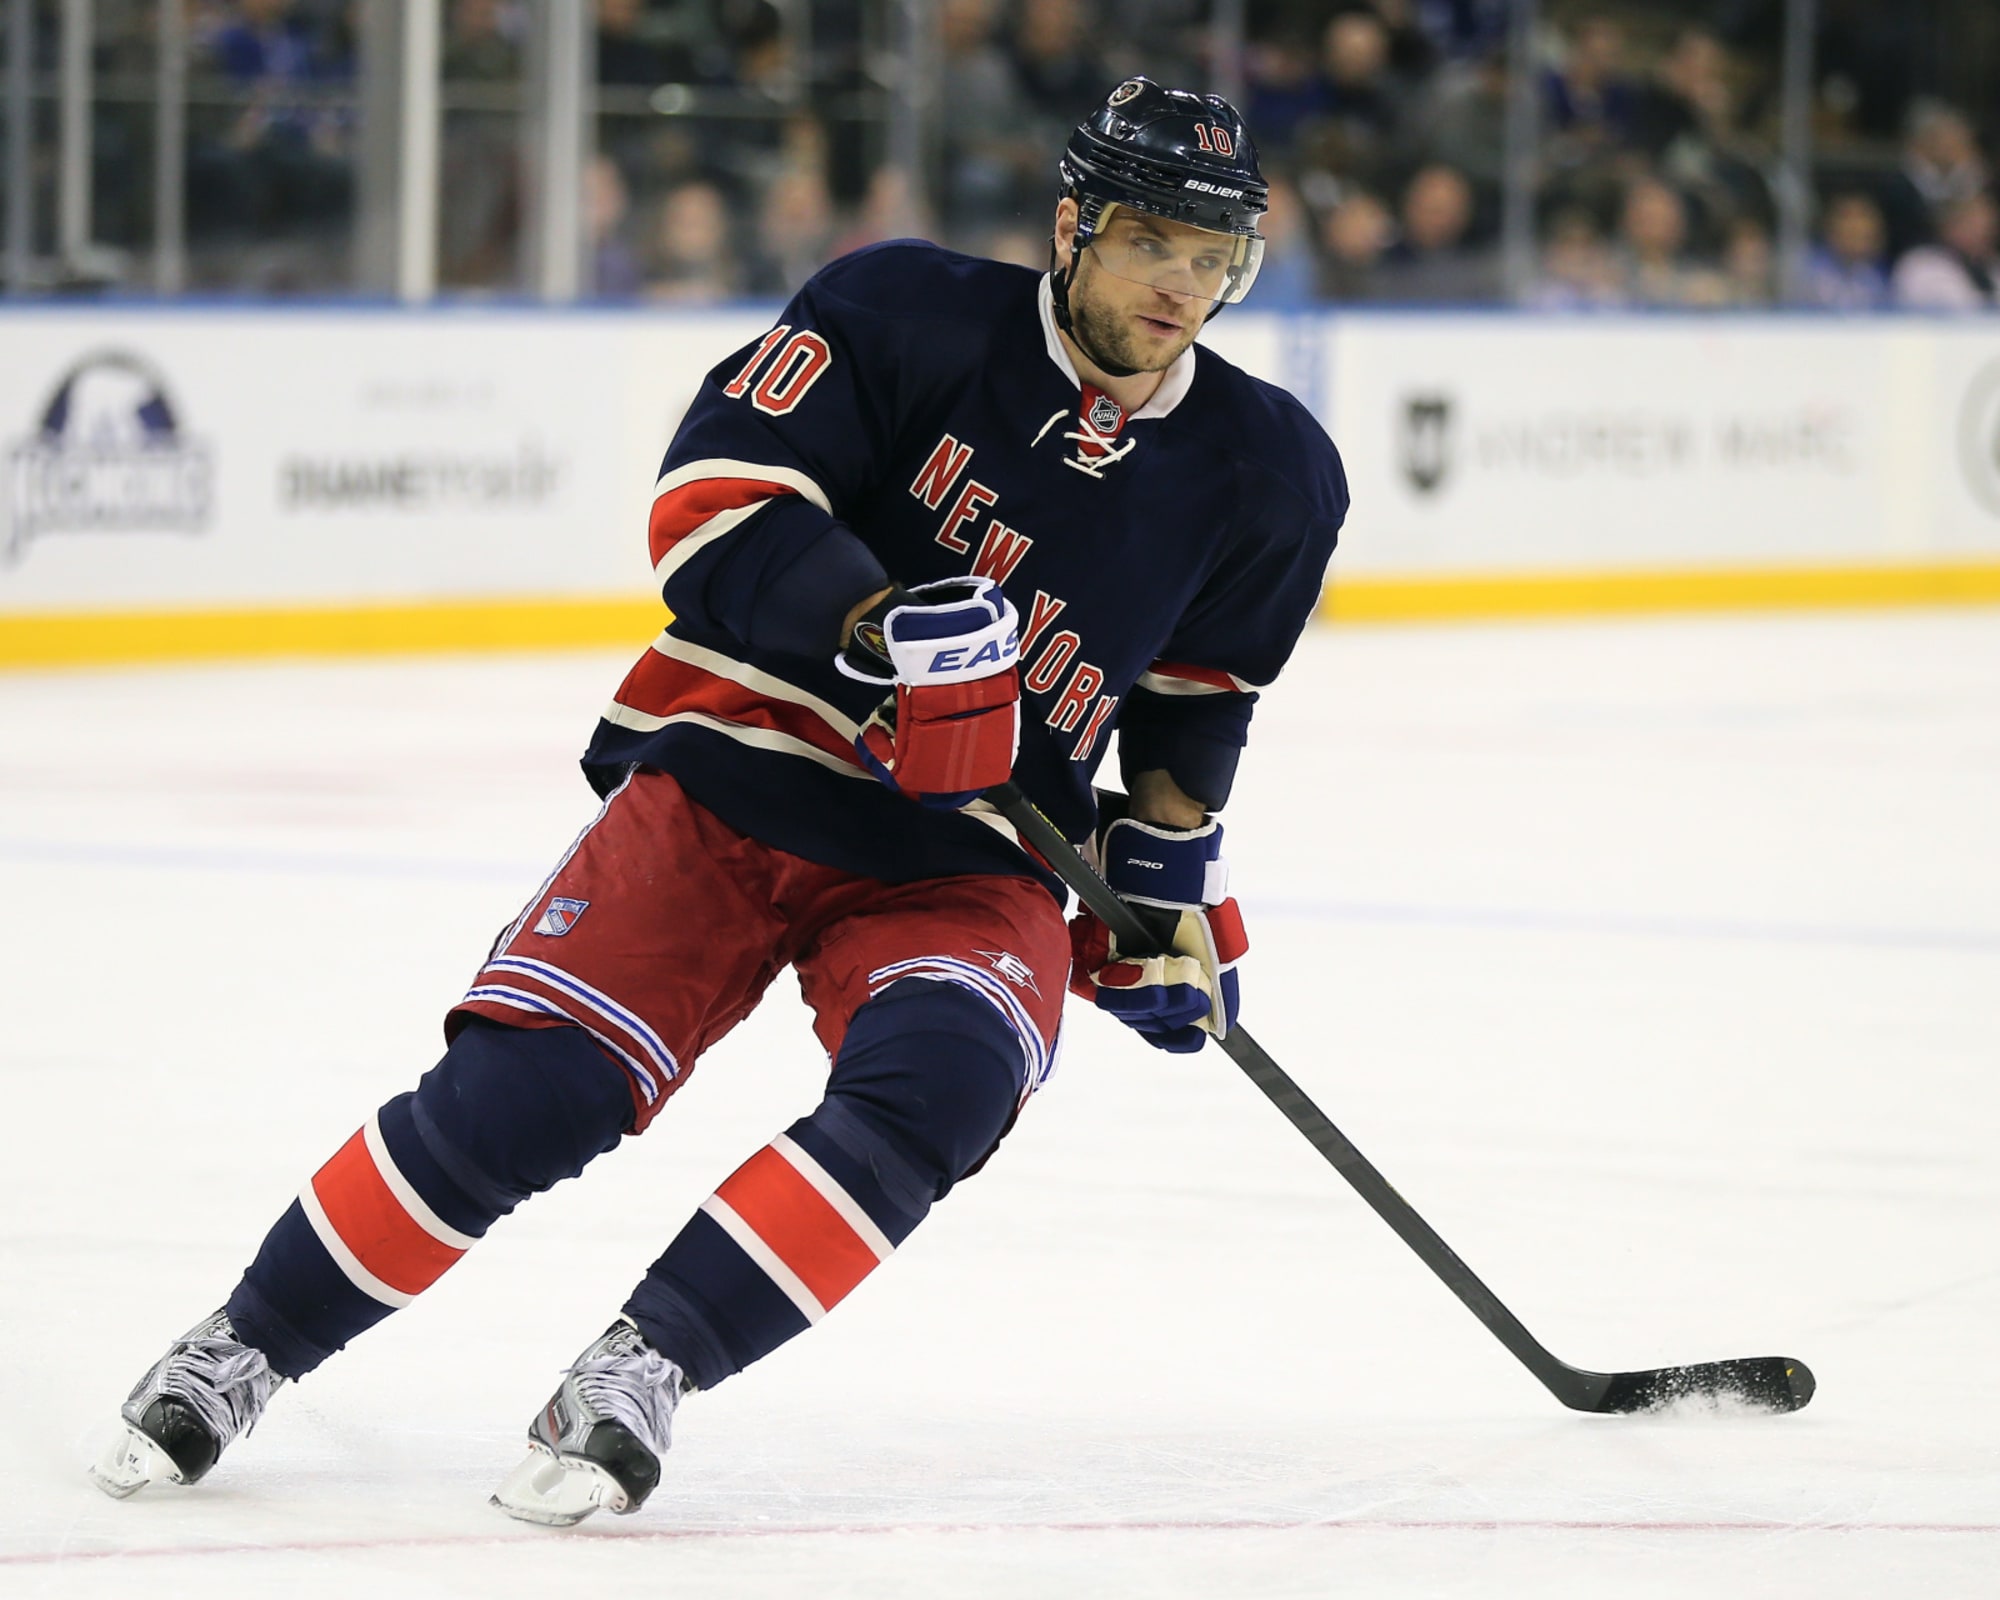 Rangers' Mats Zuccarello Gets New Deal, Then Gives Signature